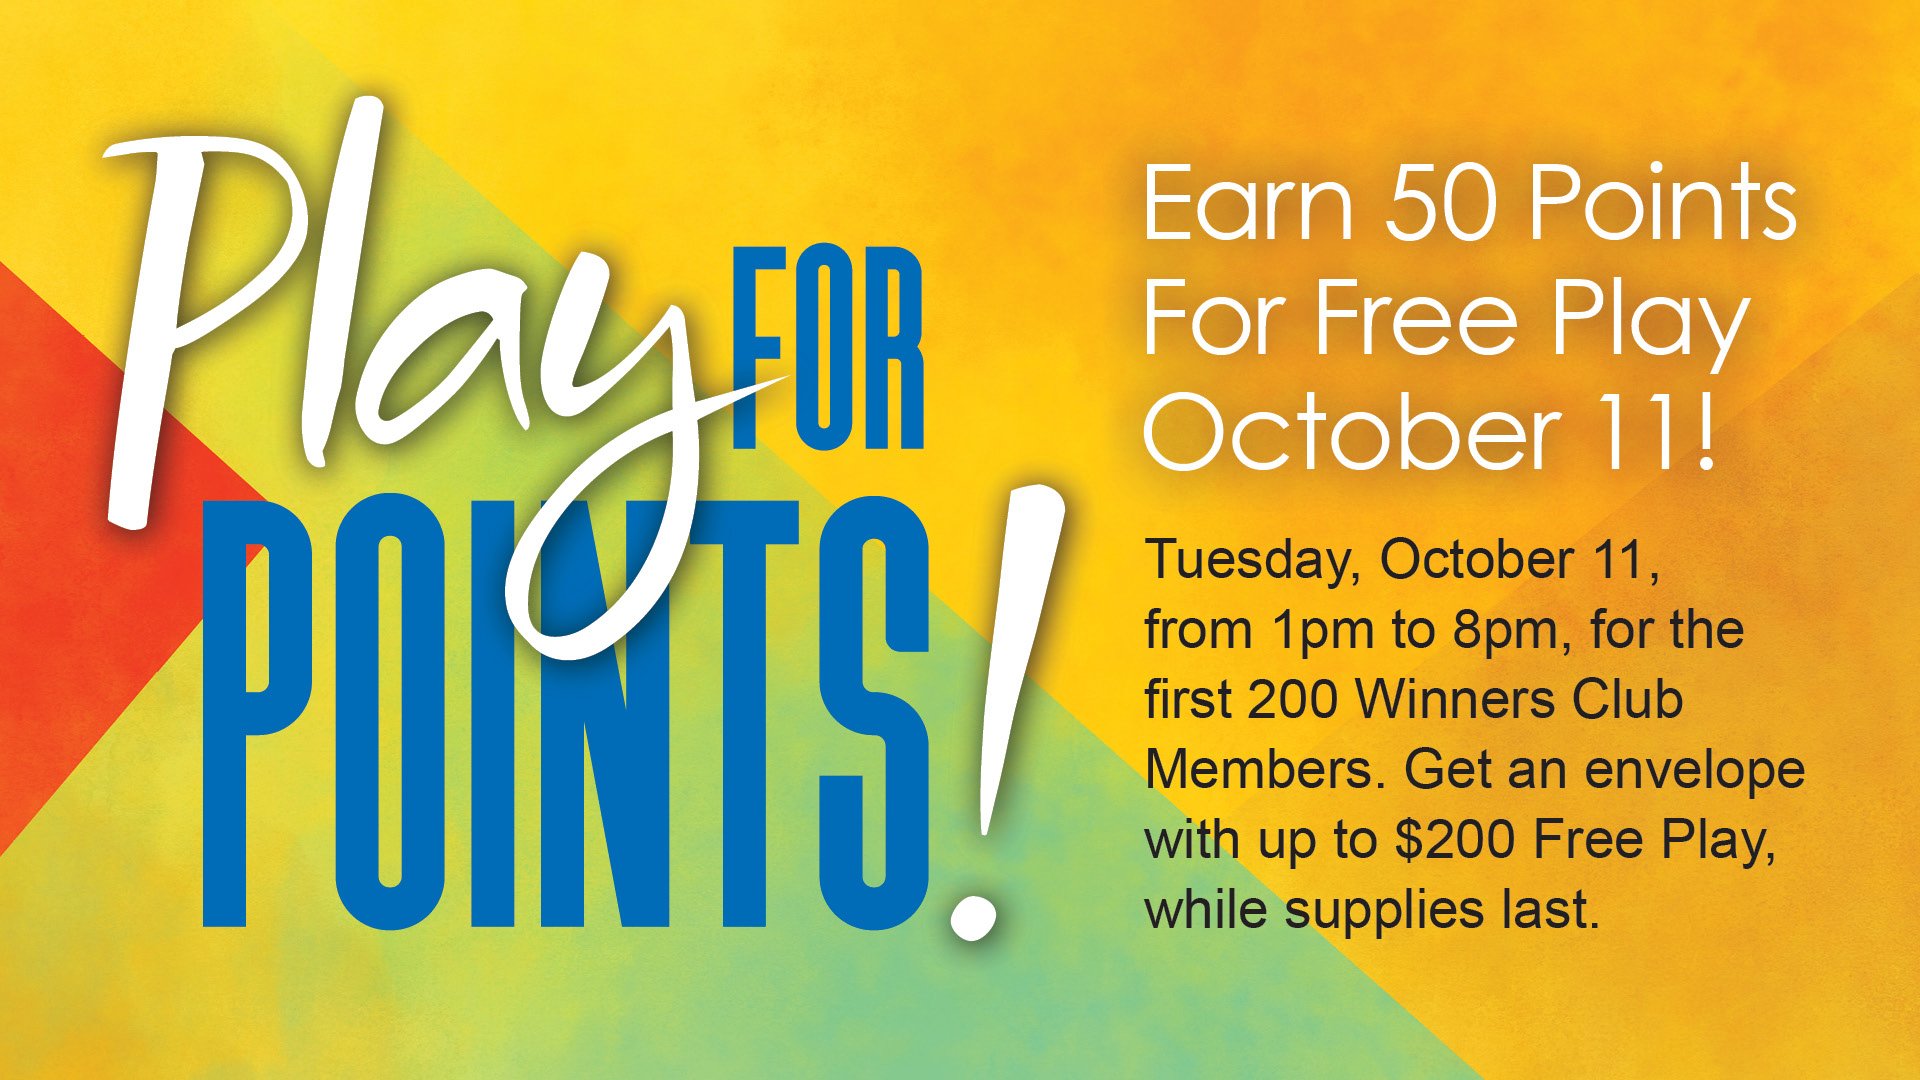 Earn 50 Points to get Free Play October 11